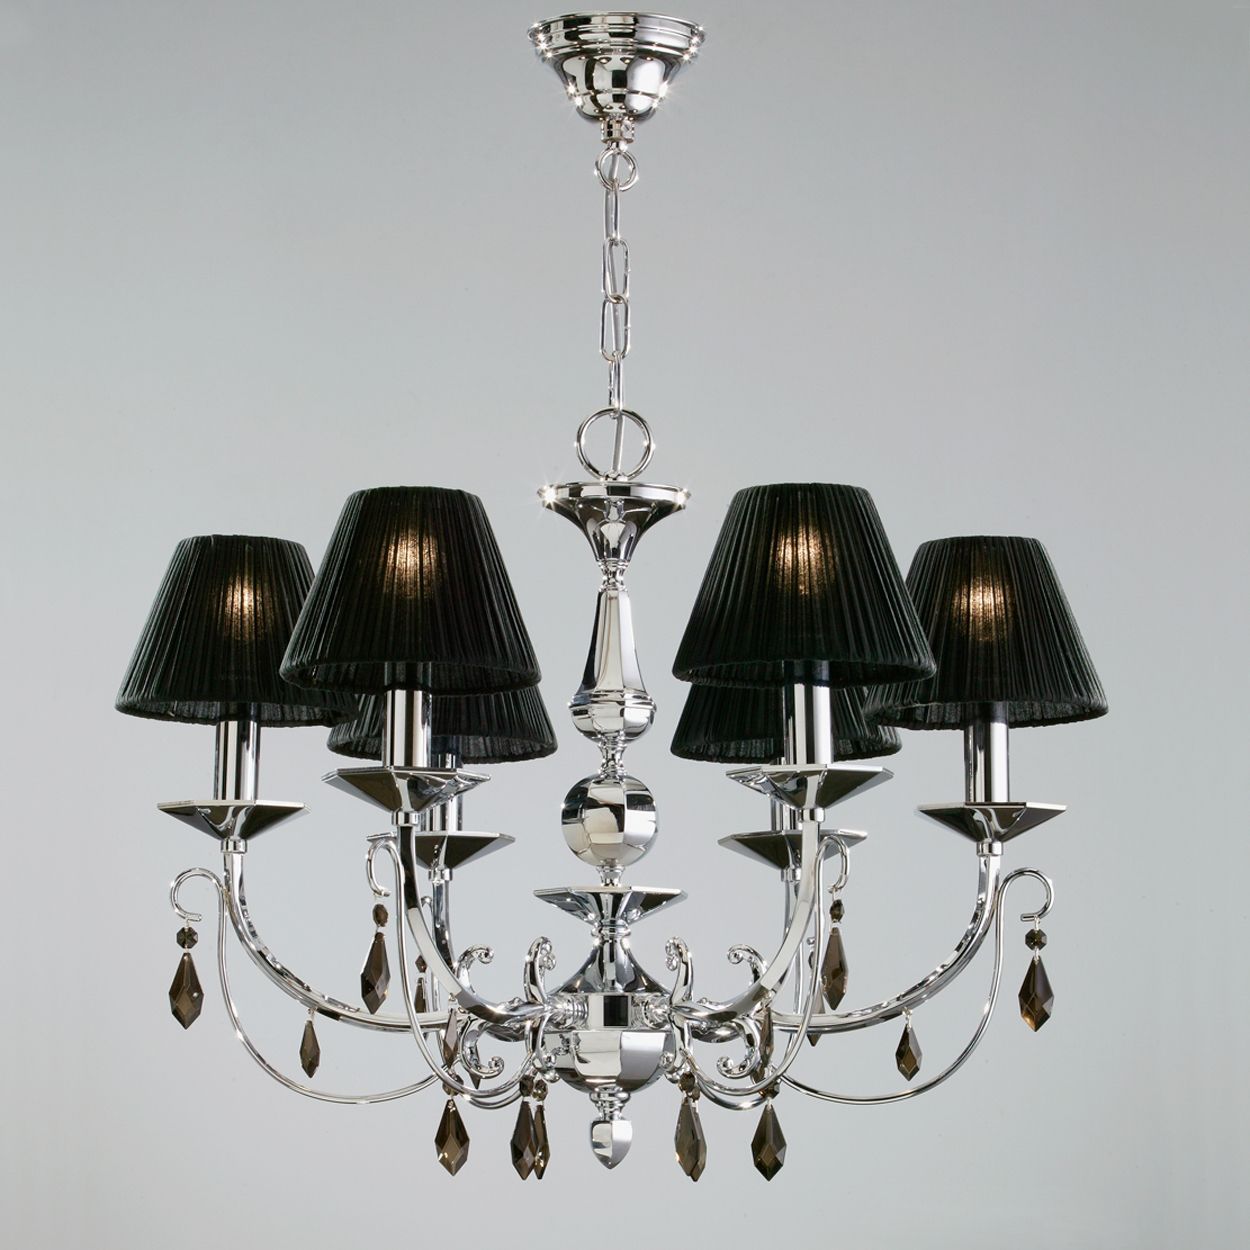 Shades For Chandeliers Thejots With Regard To Black Chandeliers With Shades (View 9 of 25)